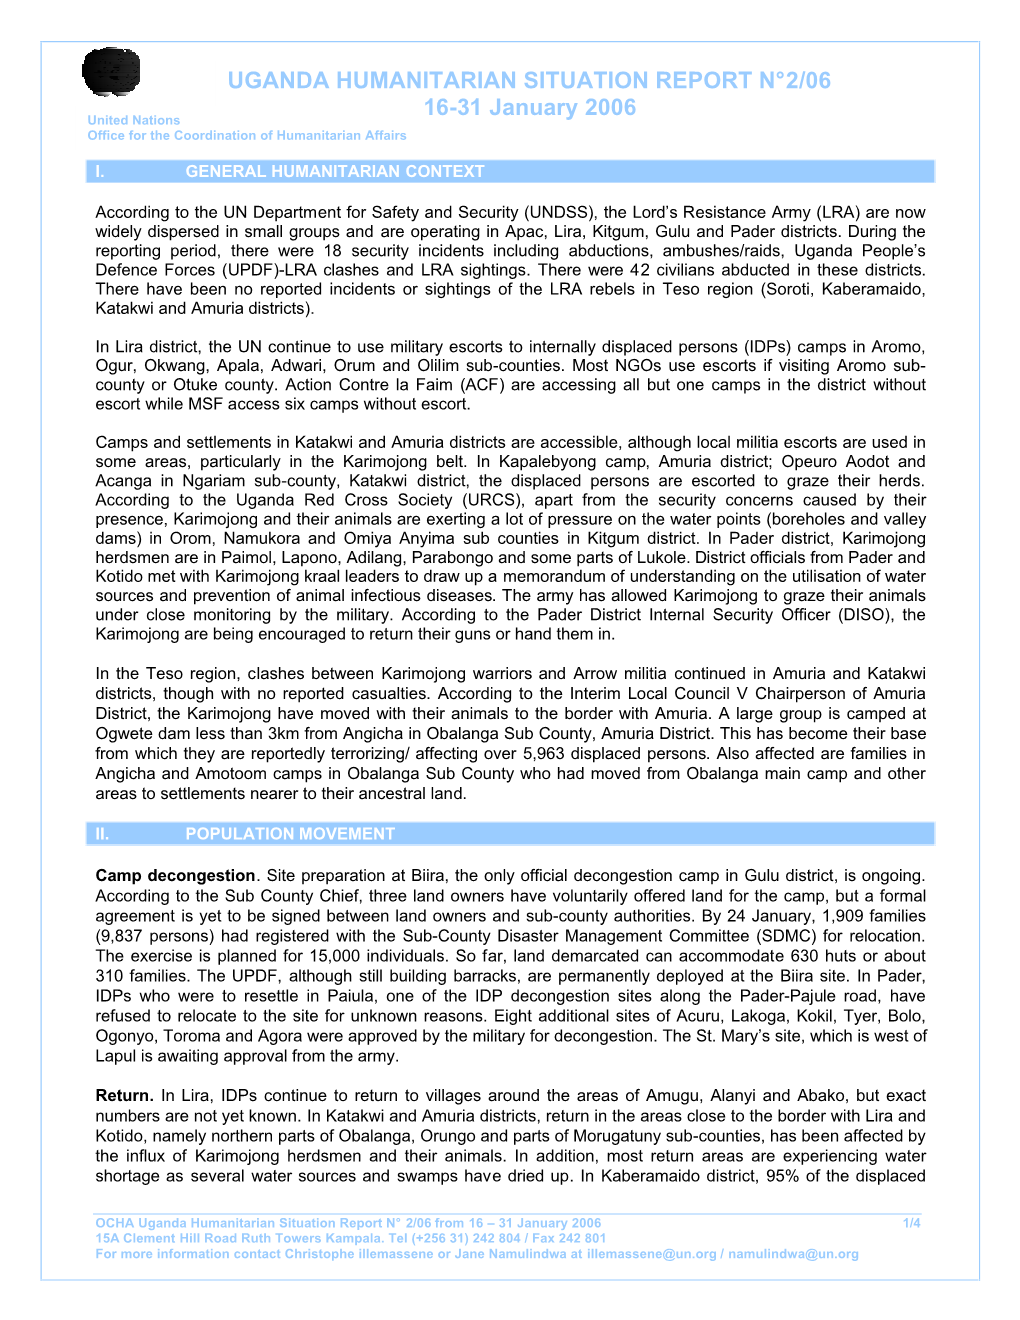 UGANDA HUMANITARIAN SITUATION REPORT N°2/06 16-31 January 2006 United Nations Office for the Coordination of Humanitarian Affairs